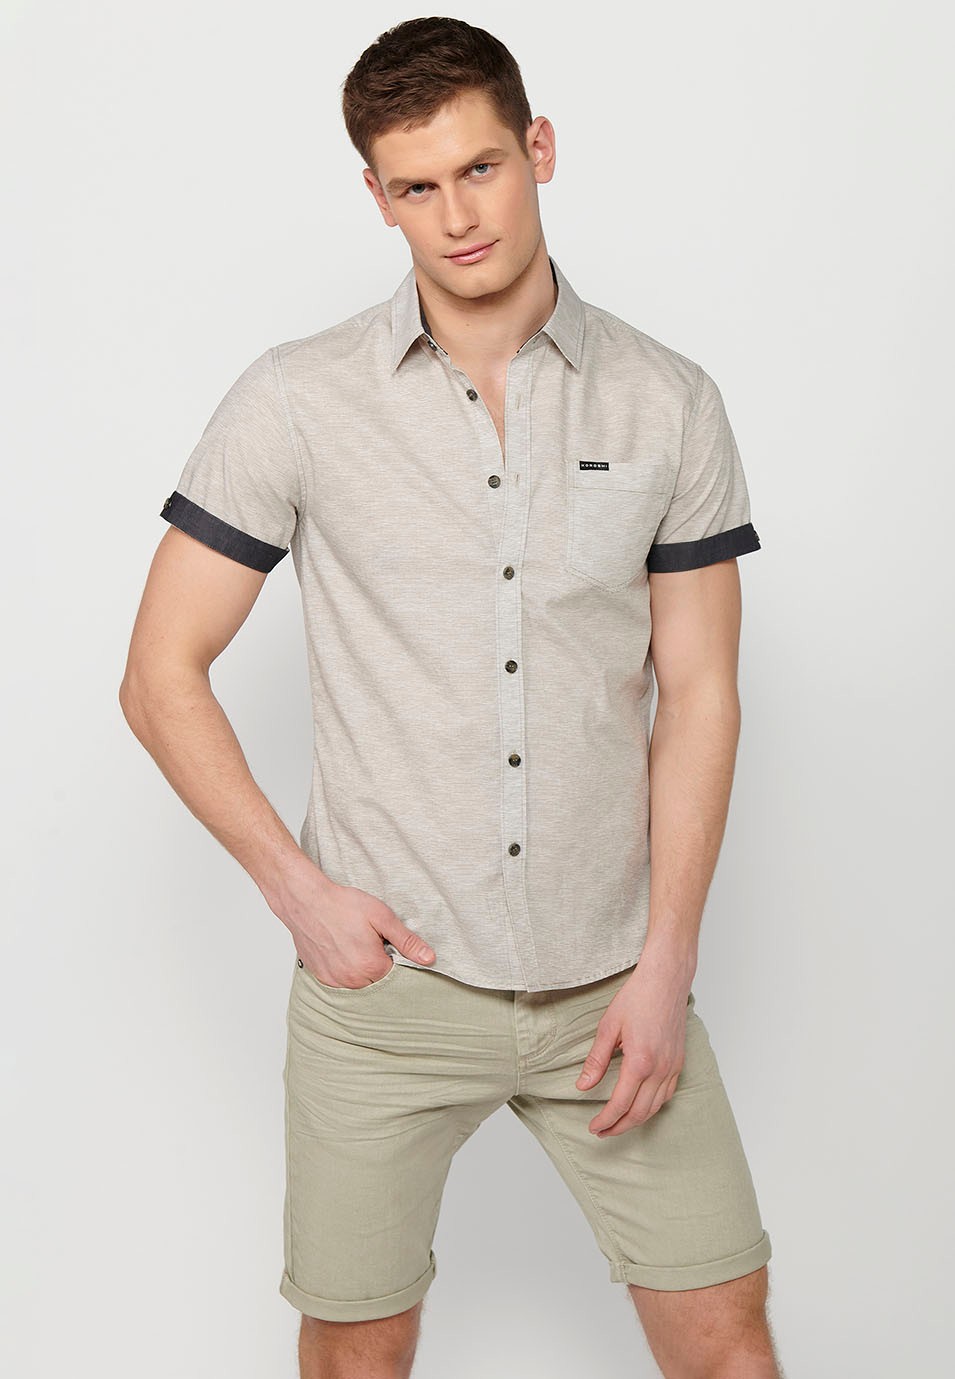 Short-sleeved cotton button-down shirt, gray color for men